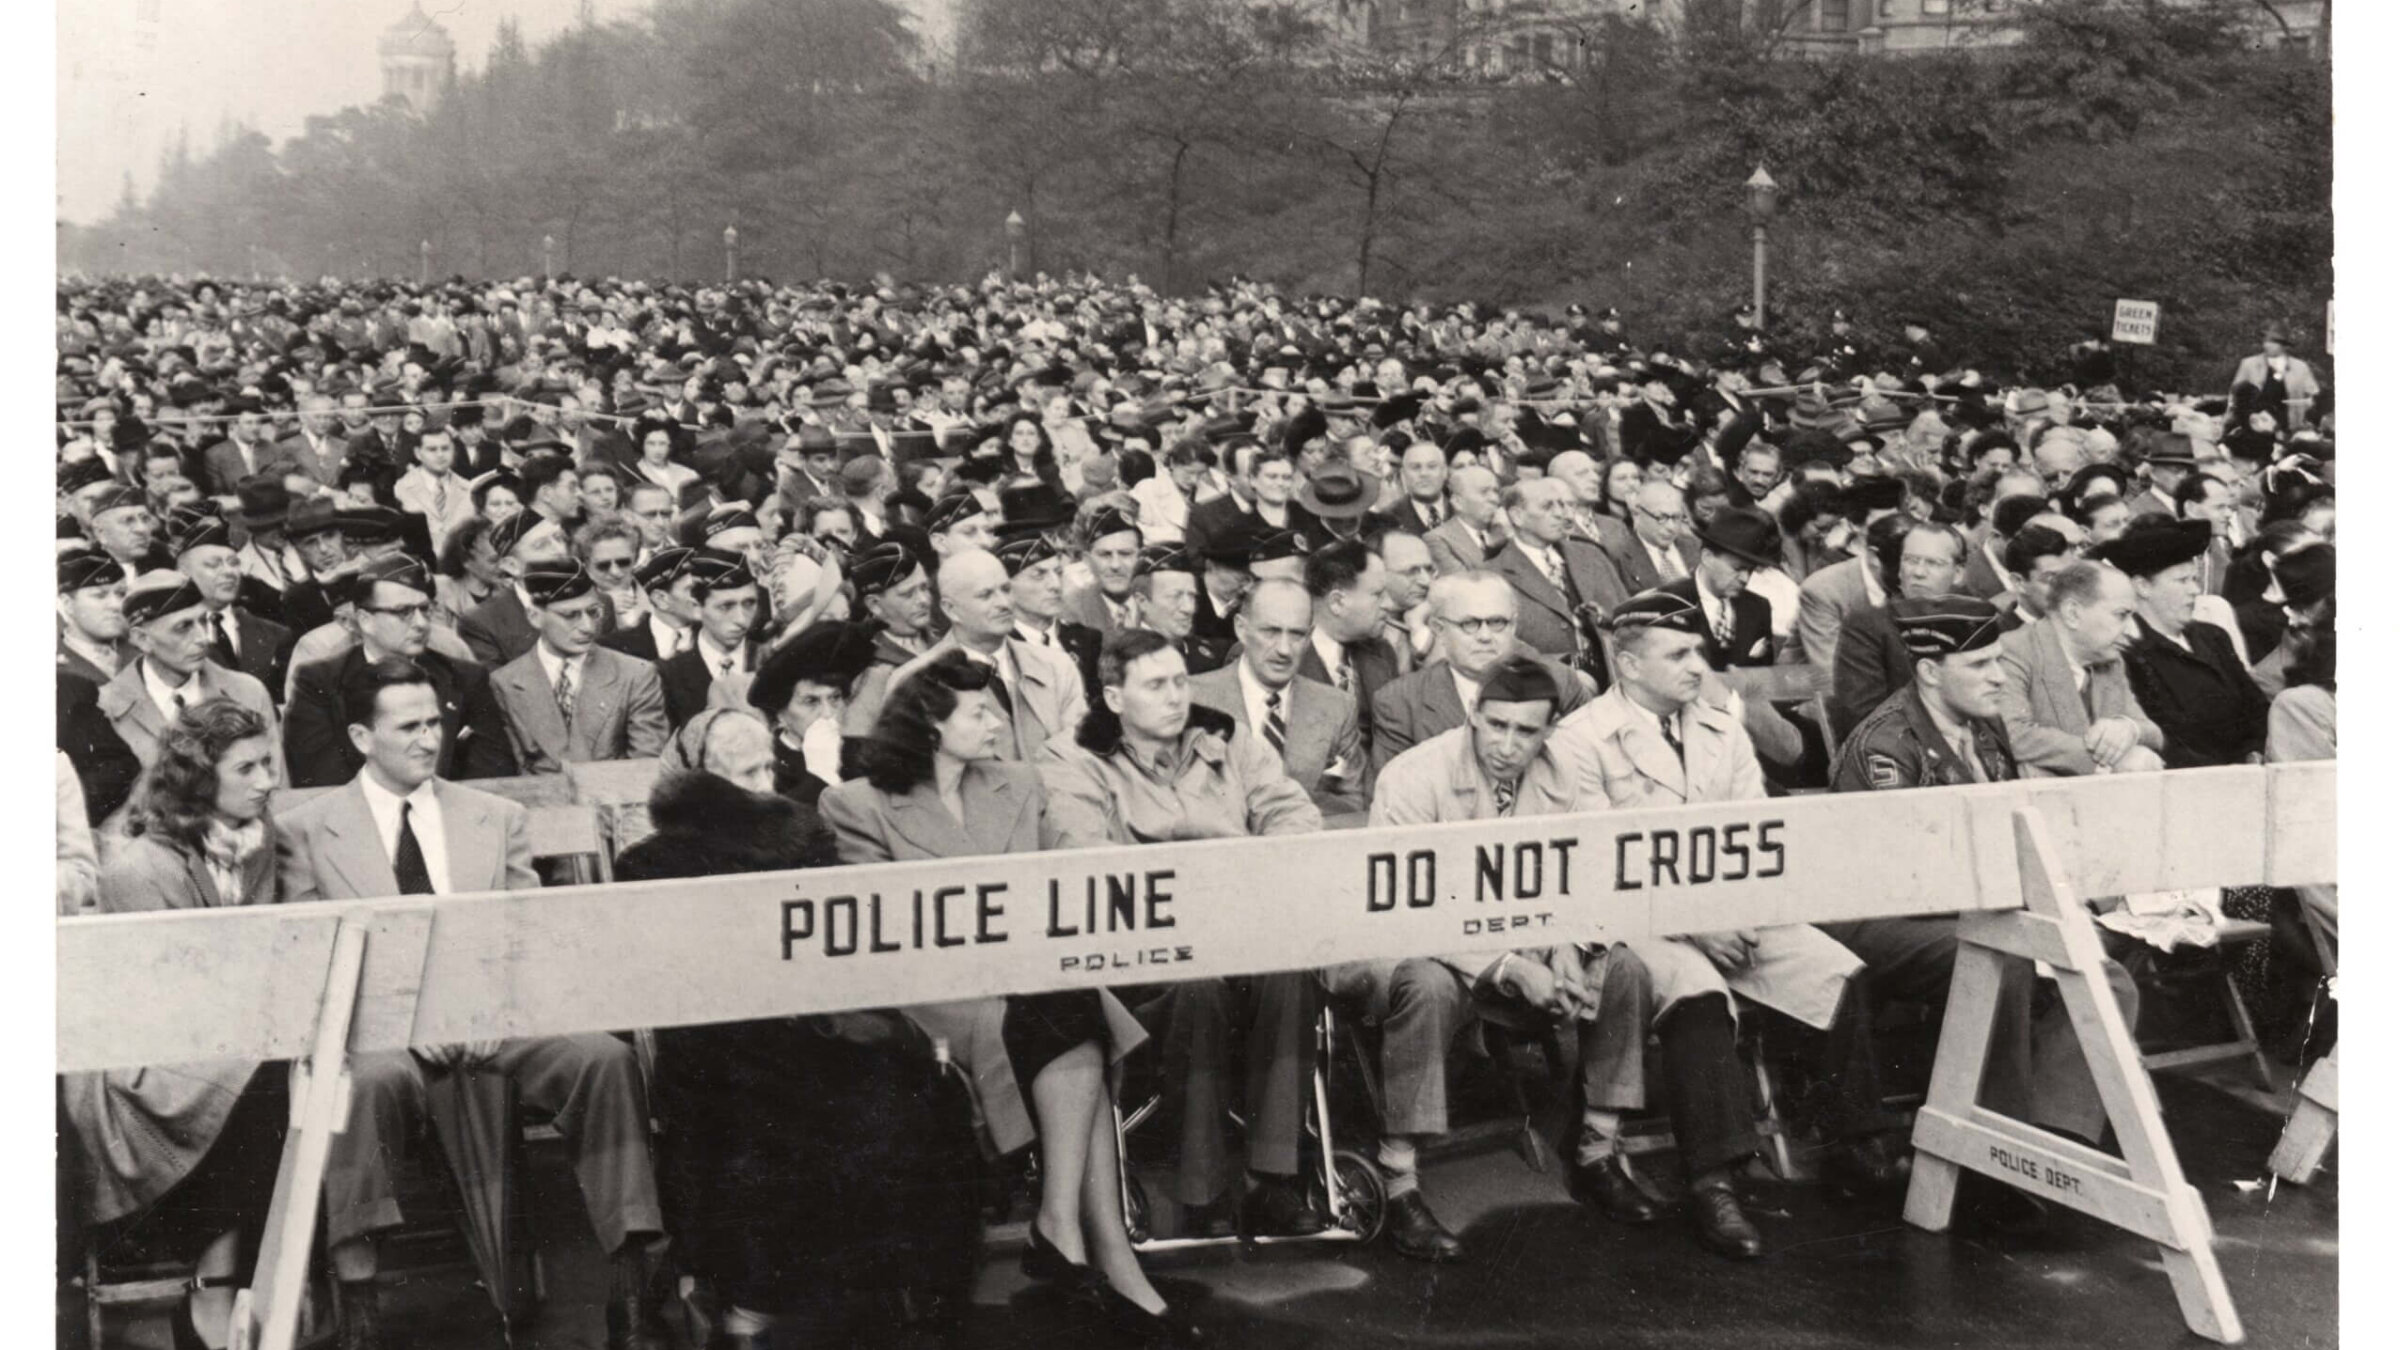 New York, 1947 - Cornerstone laying ceremony for Holocaust Memorial planned for Riverside Drive.